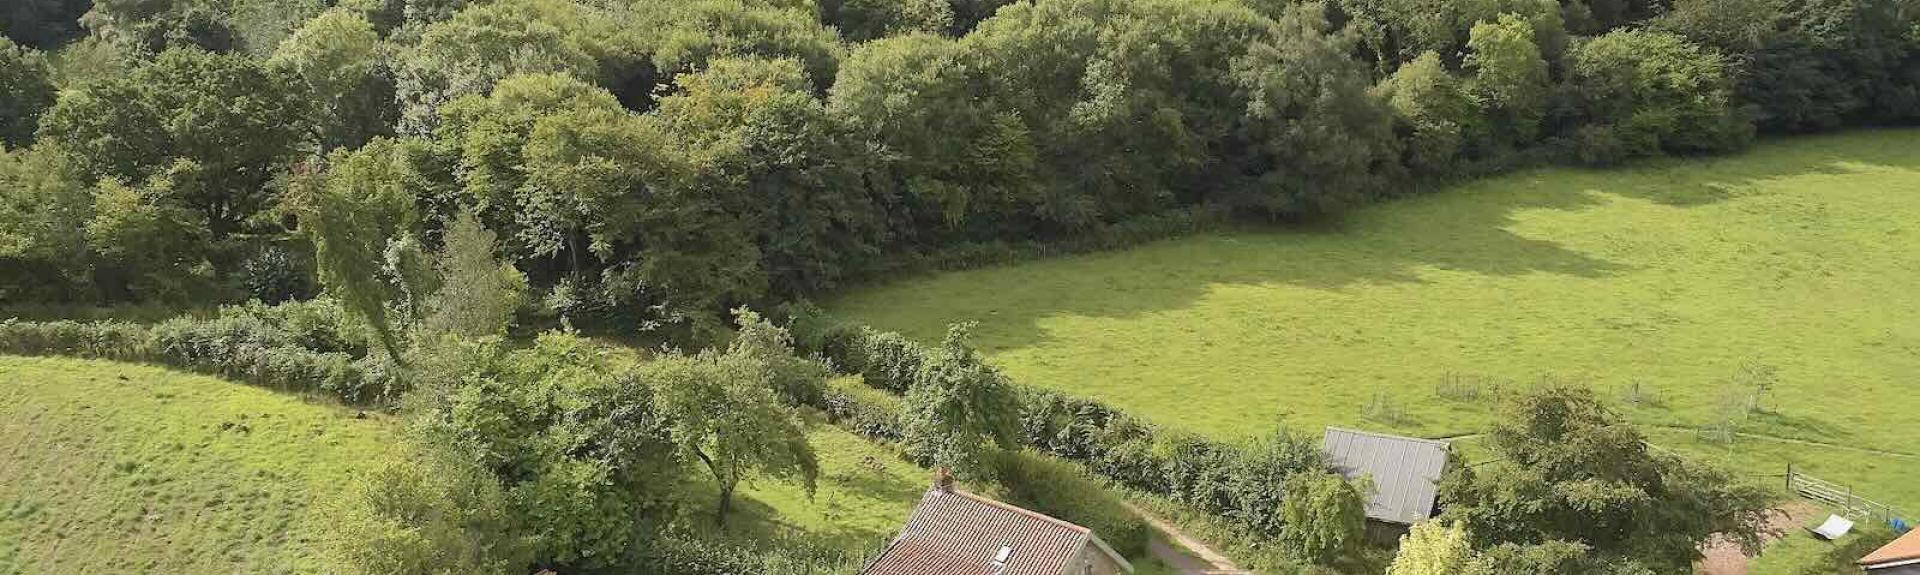 Aerial view of a holiday cottage surrounded by fields beneath a hilltop wood.